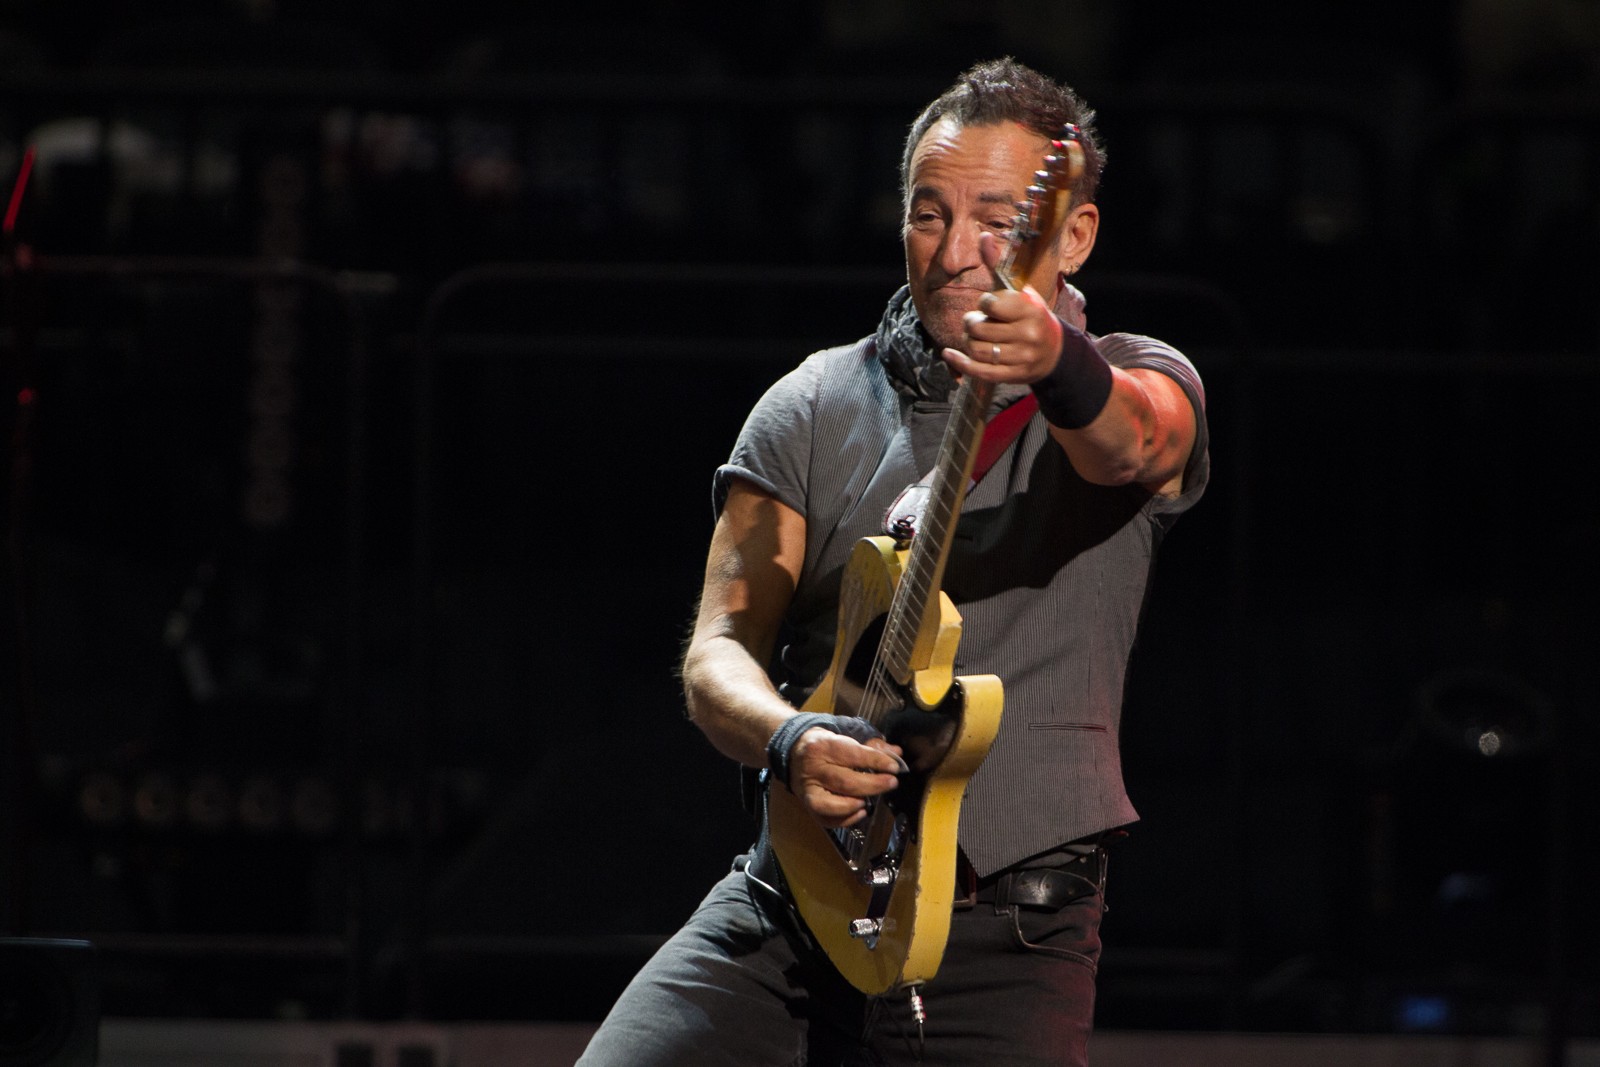 Bruce Springsteen Spotted Wearing a Black Shirt, Jeans, and Blazer